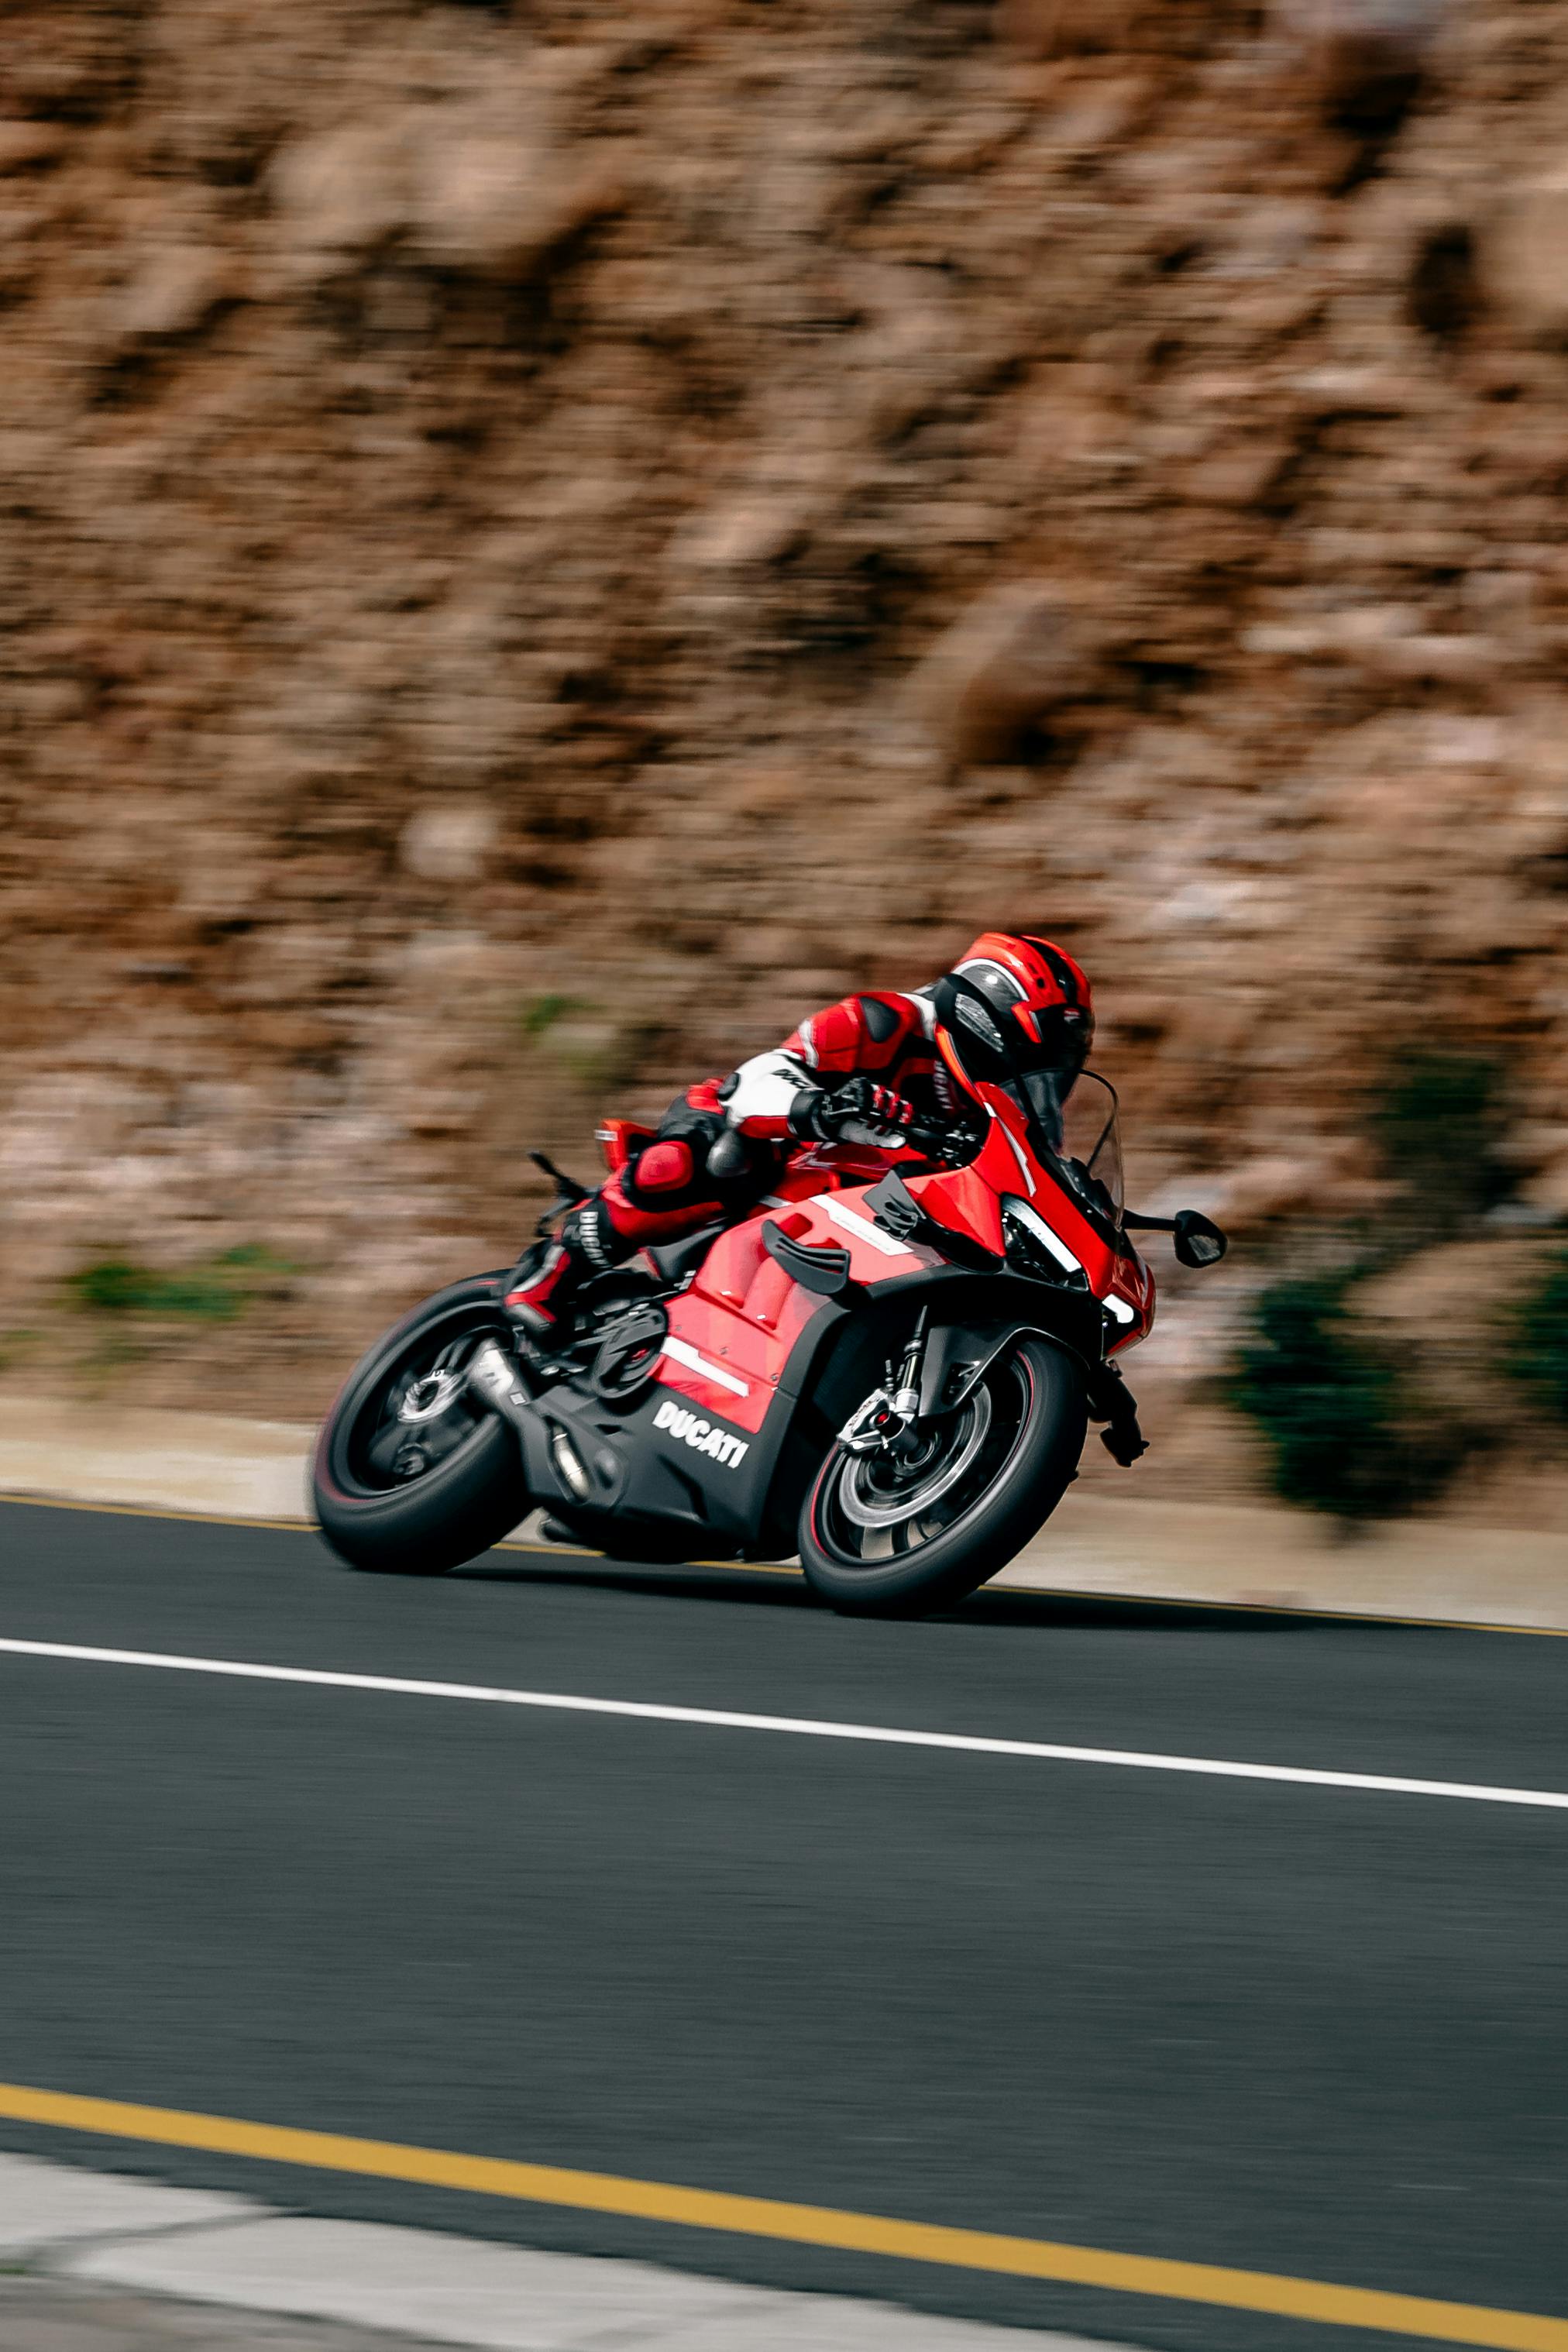 Ducati Photos, Download The BEST Free Ducati Stock Photos & HD Images